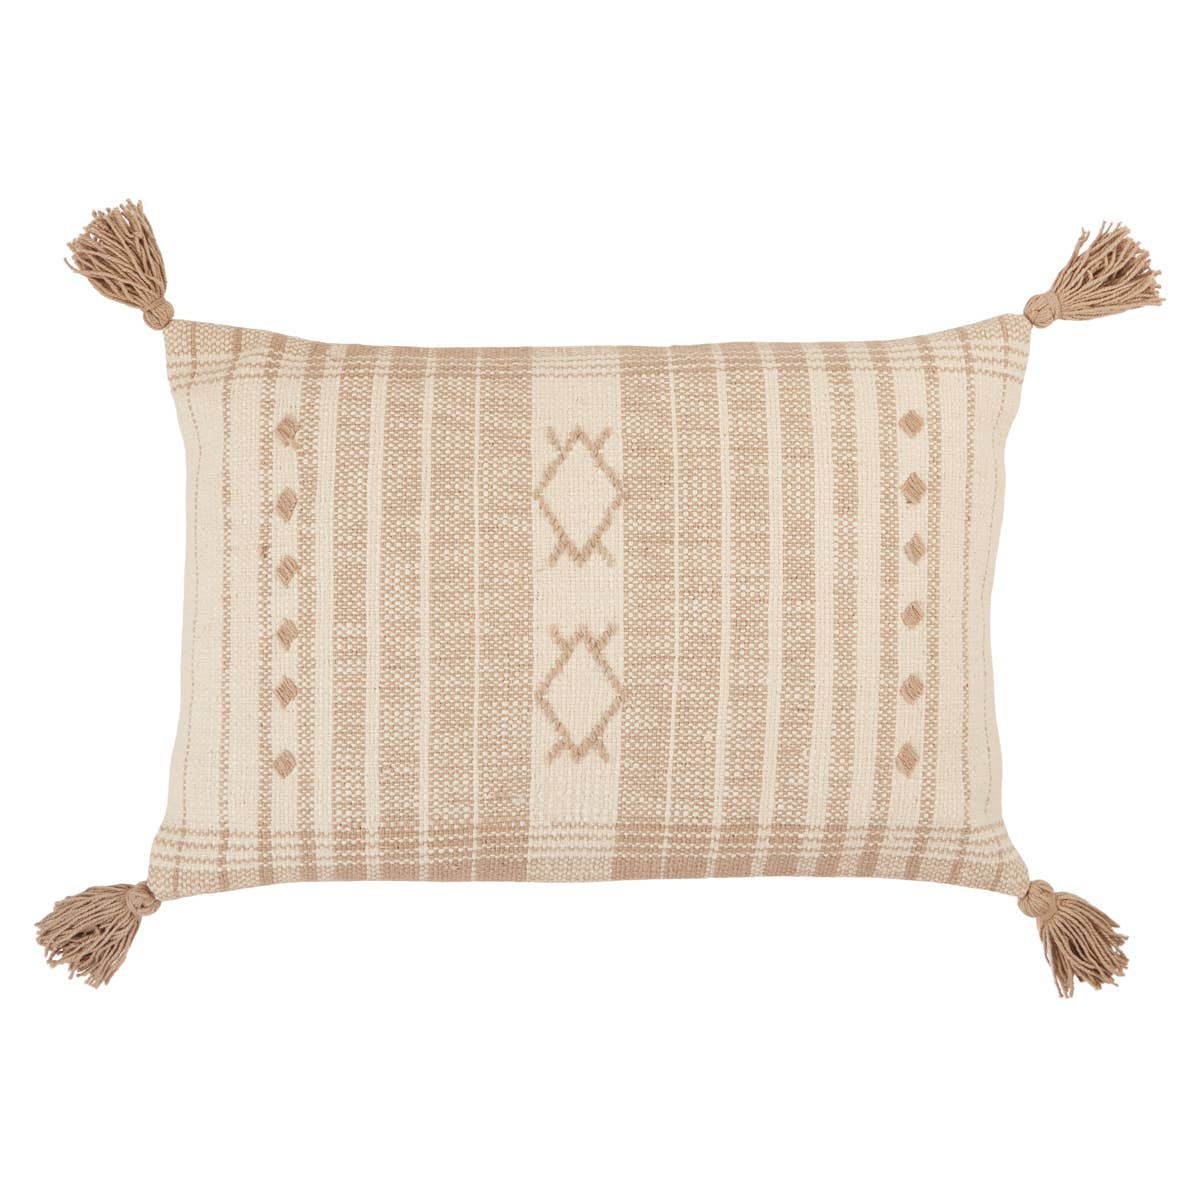 We love the fun tassels found on all four corners of this Parable Razili - Taupe. This pillow showcases a mix of stripe and tribal motifs in chic tones of taupe and cream. Place on your bed or sofa to bring some texture to the space!   Size: 22" x 22"  100% Cotton Zipper Closure India